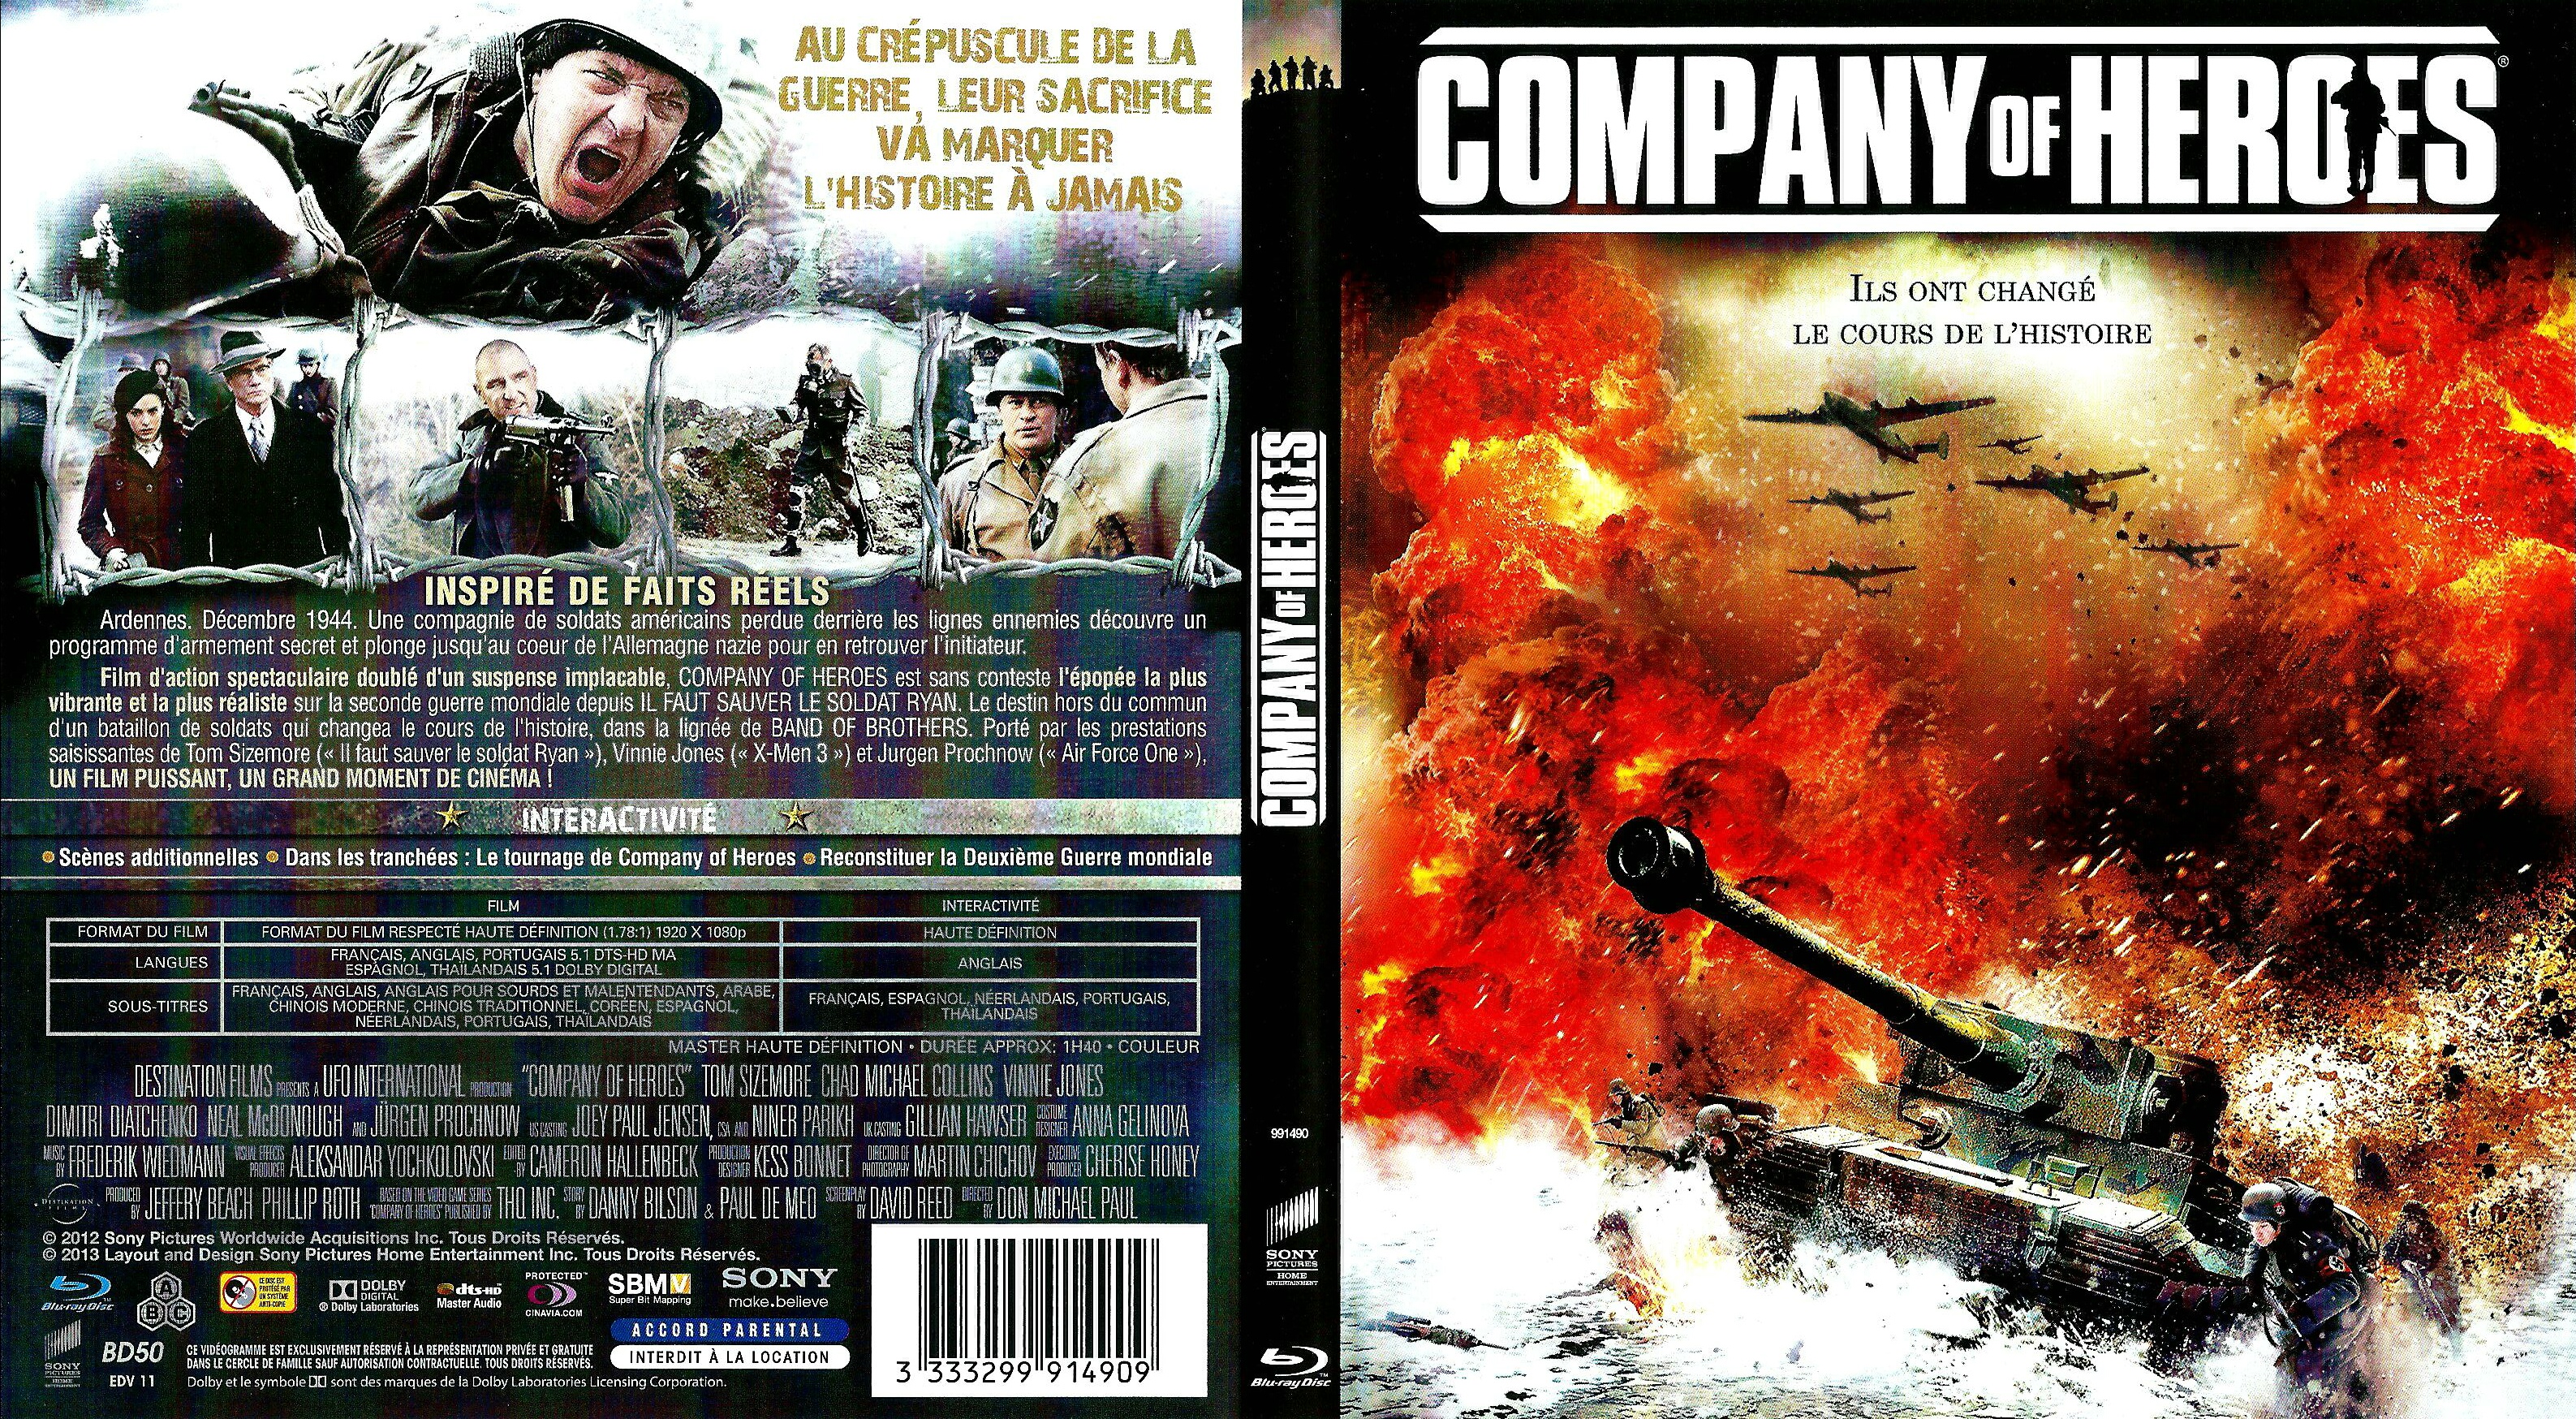 Jaquette DVD Company of Heroes (BLU-RAY)